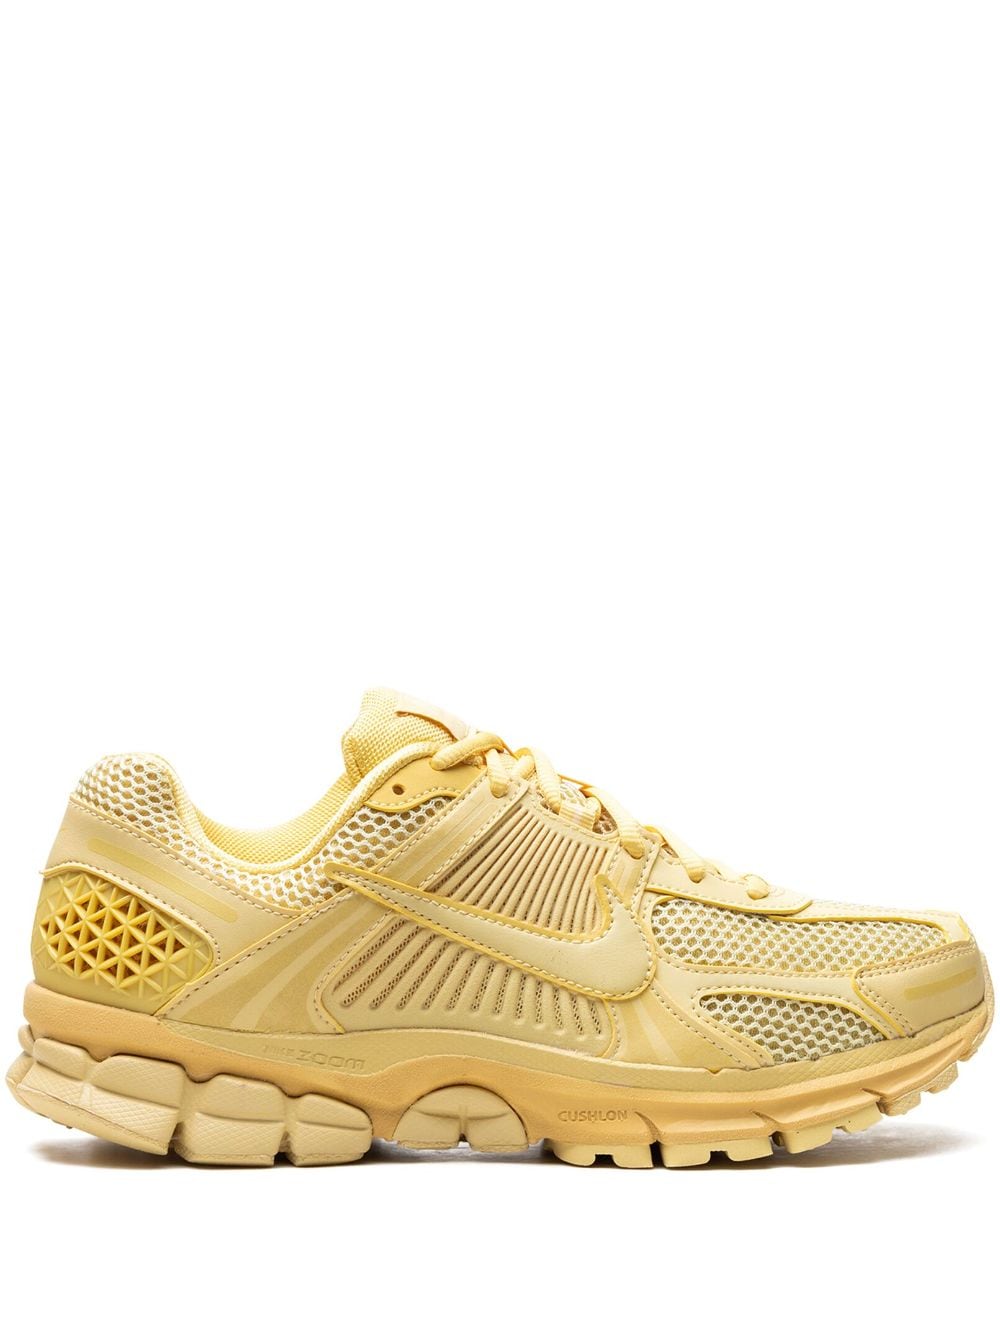 Image 1 of Nike Zoom Vomero 5 "Saturn Gold" sneakers